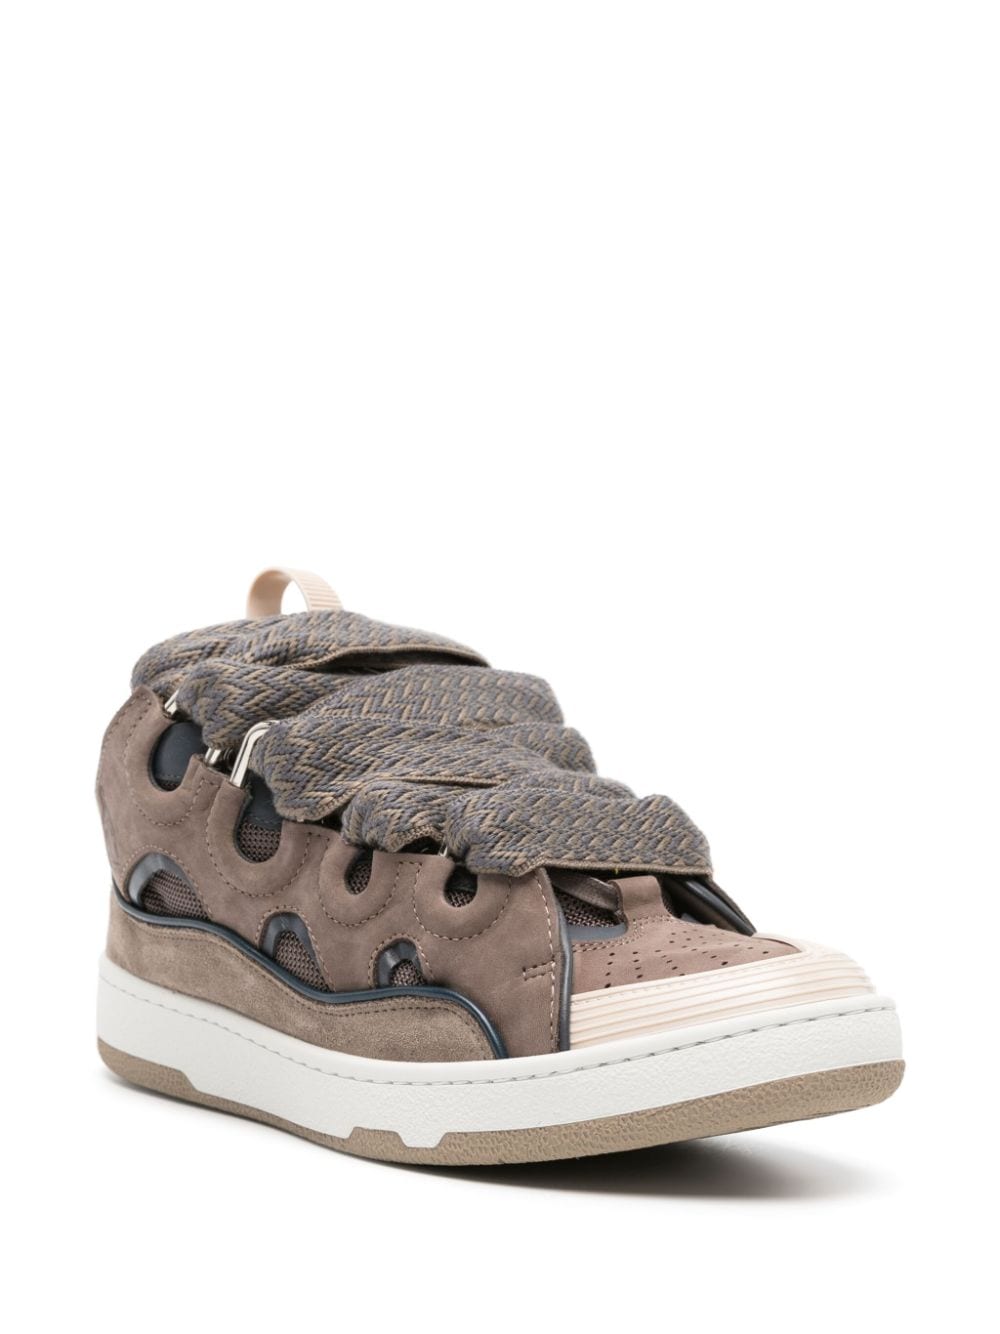 Lanvin Curb leather sneakers - Bruin